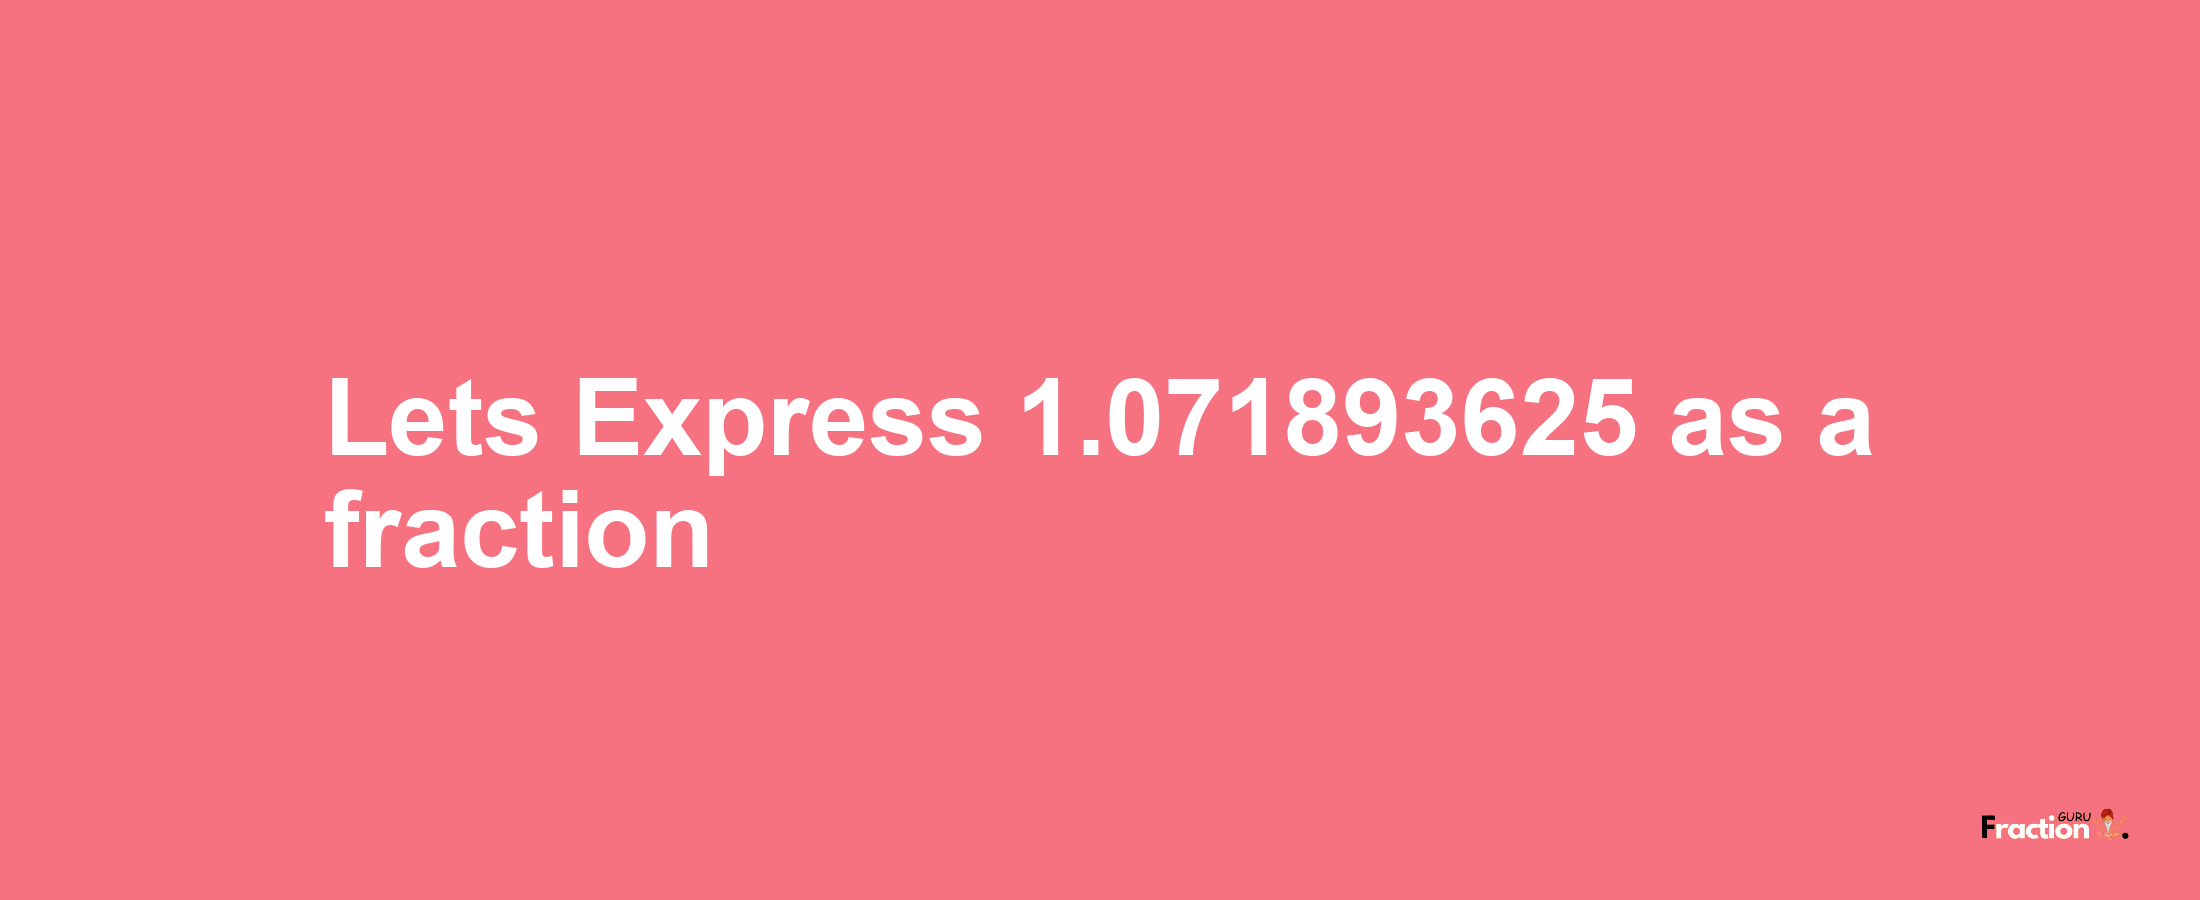 Lets Express 1.071893625 as afraction